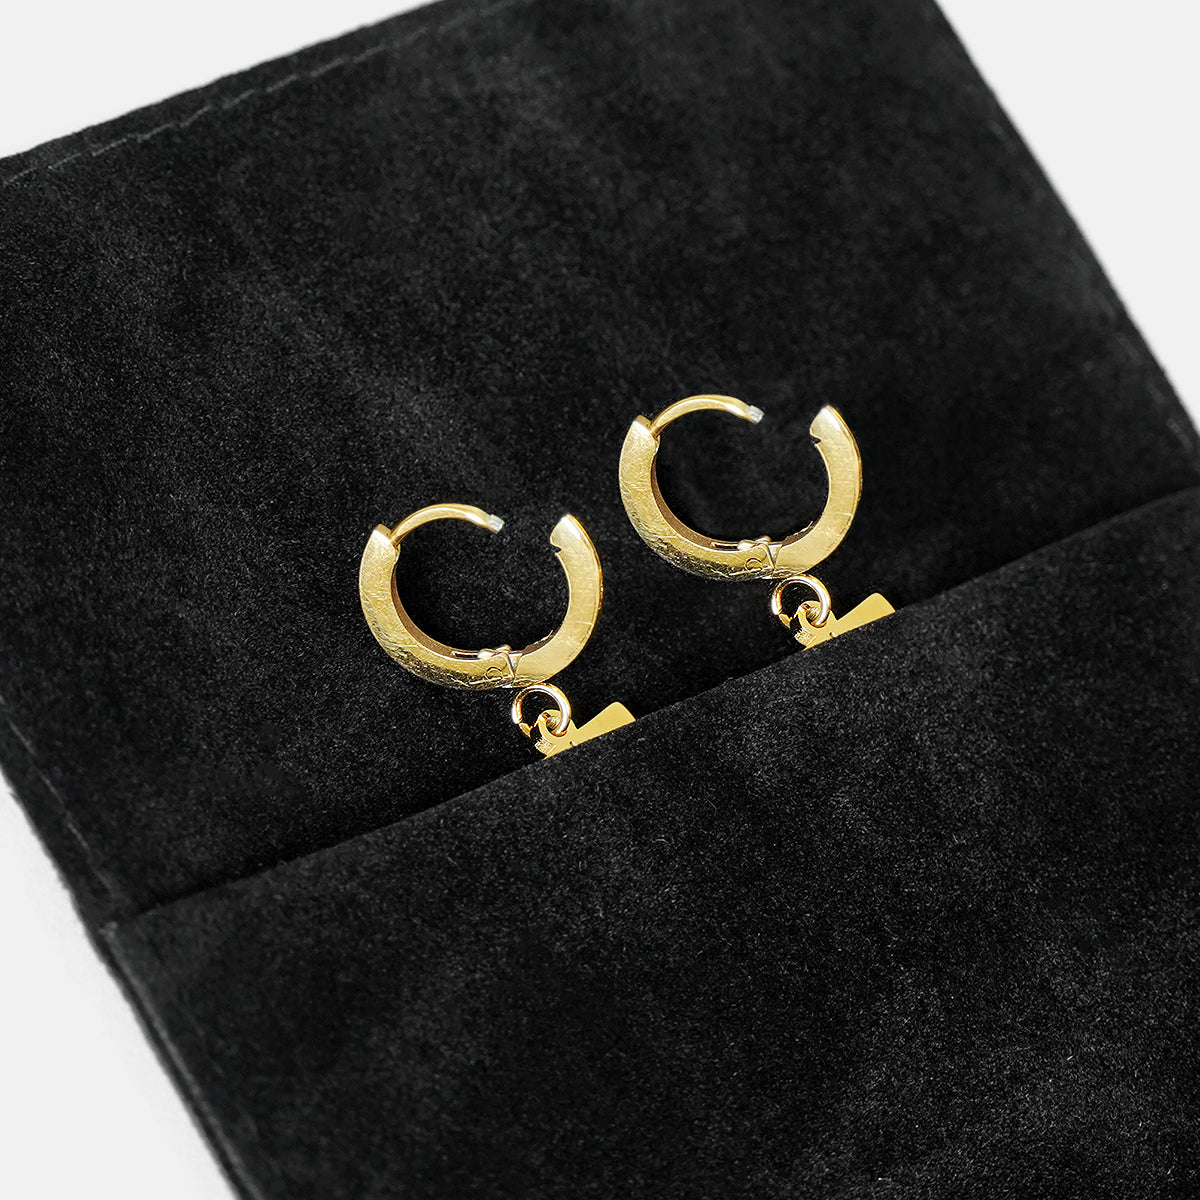 36 Number Earring - Gold Plated Stainless Steel